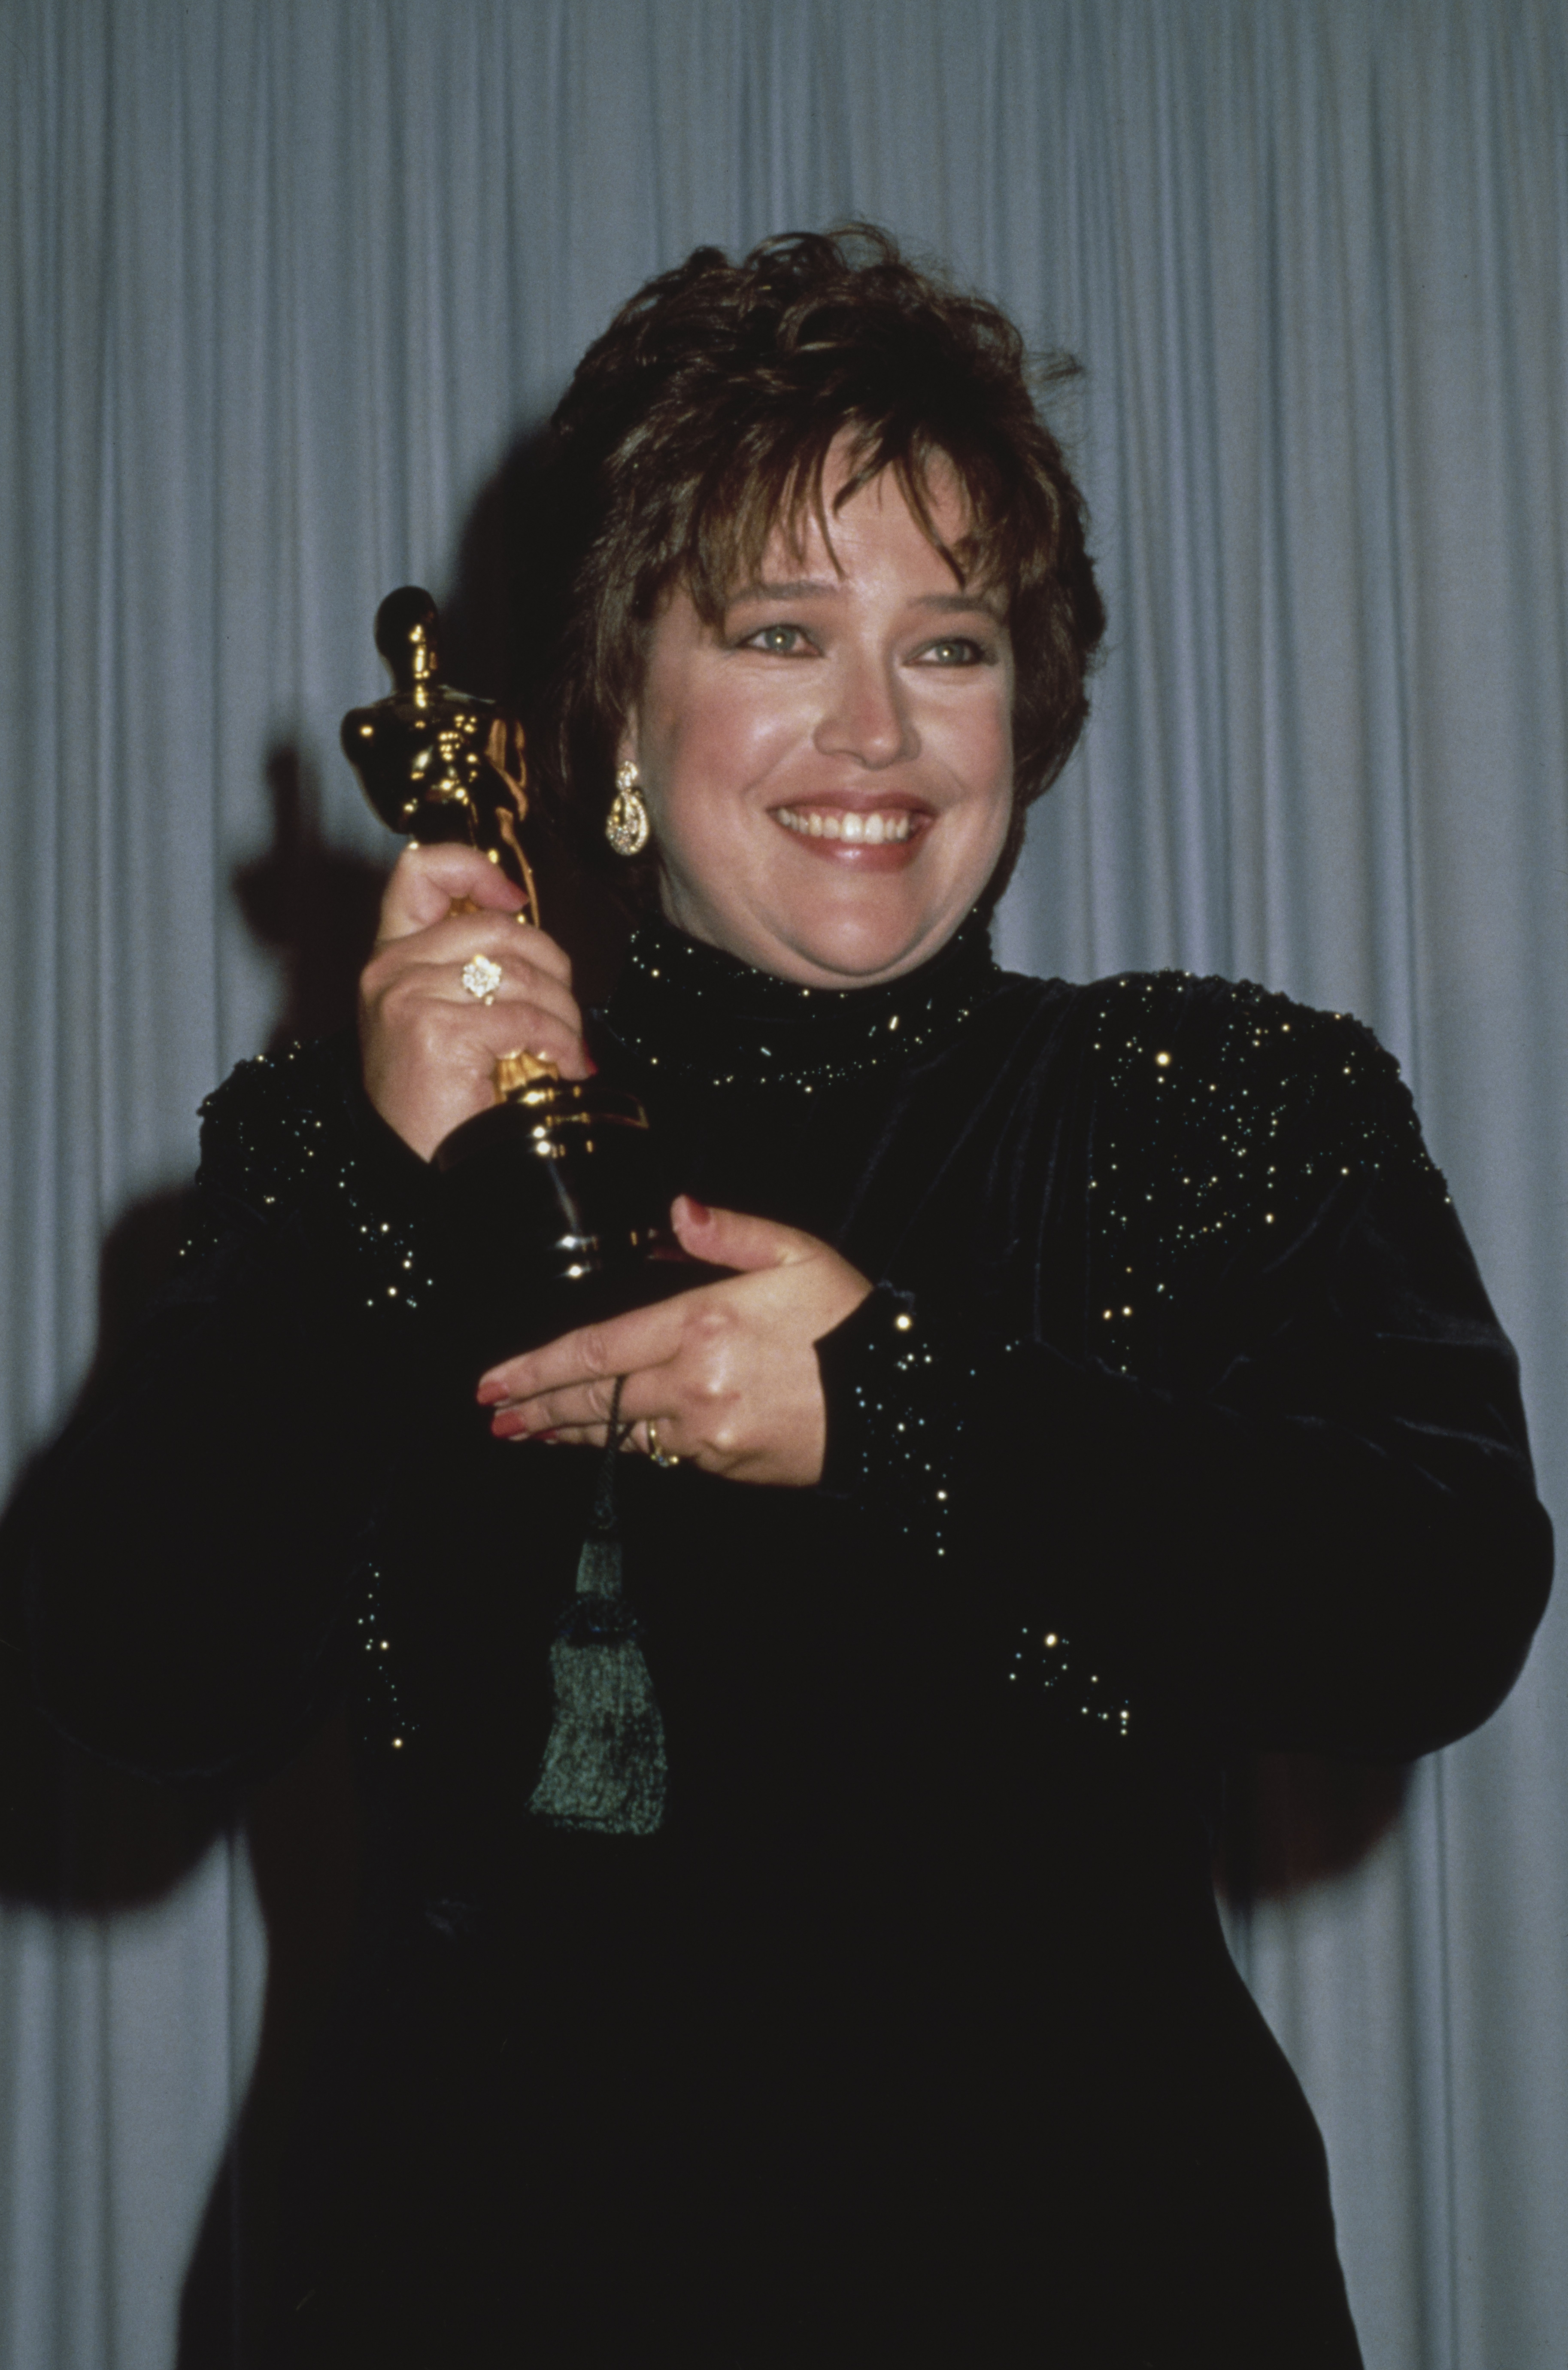 Kathy Bates in Los Angeles, California, on March 25, 1991 | Source: Getty Images